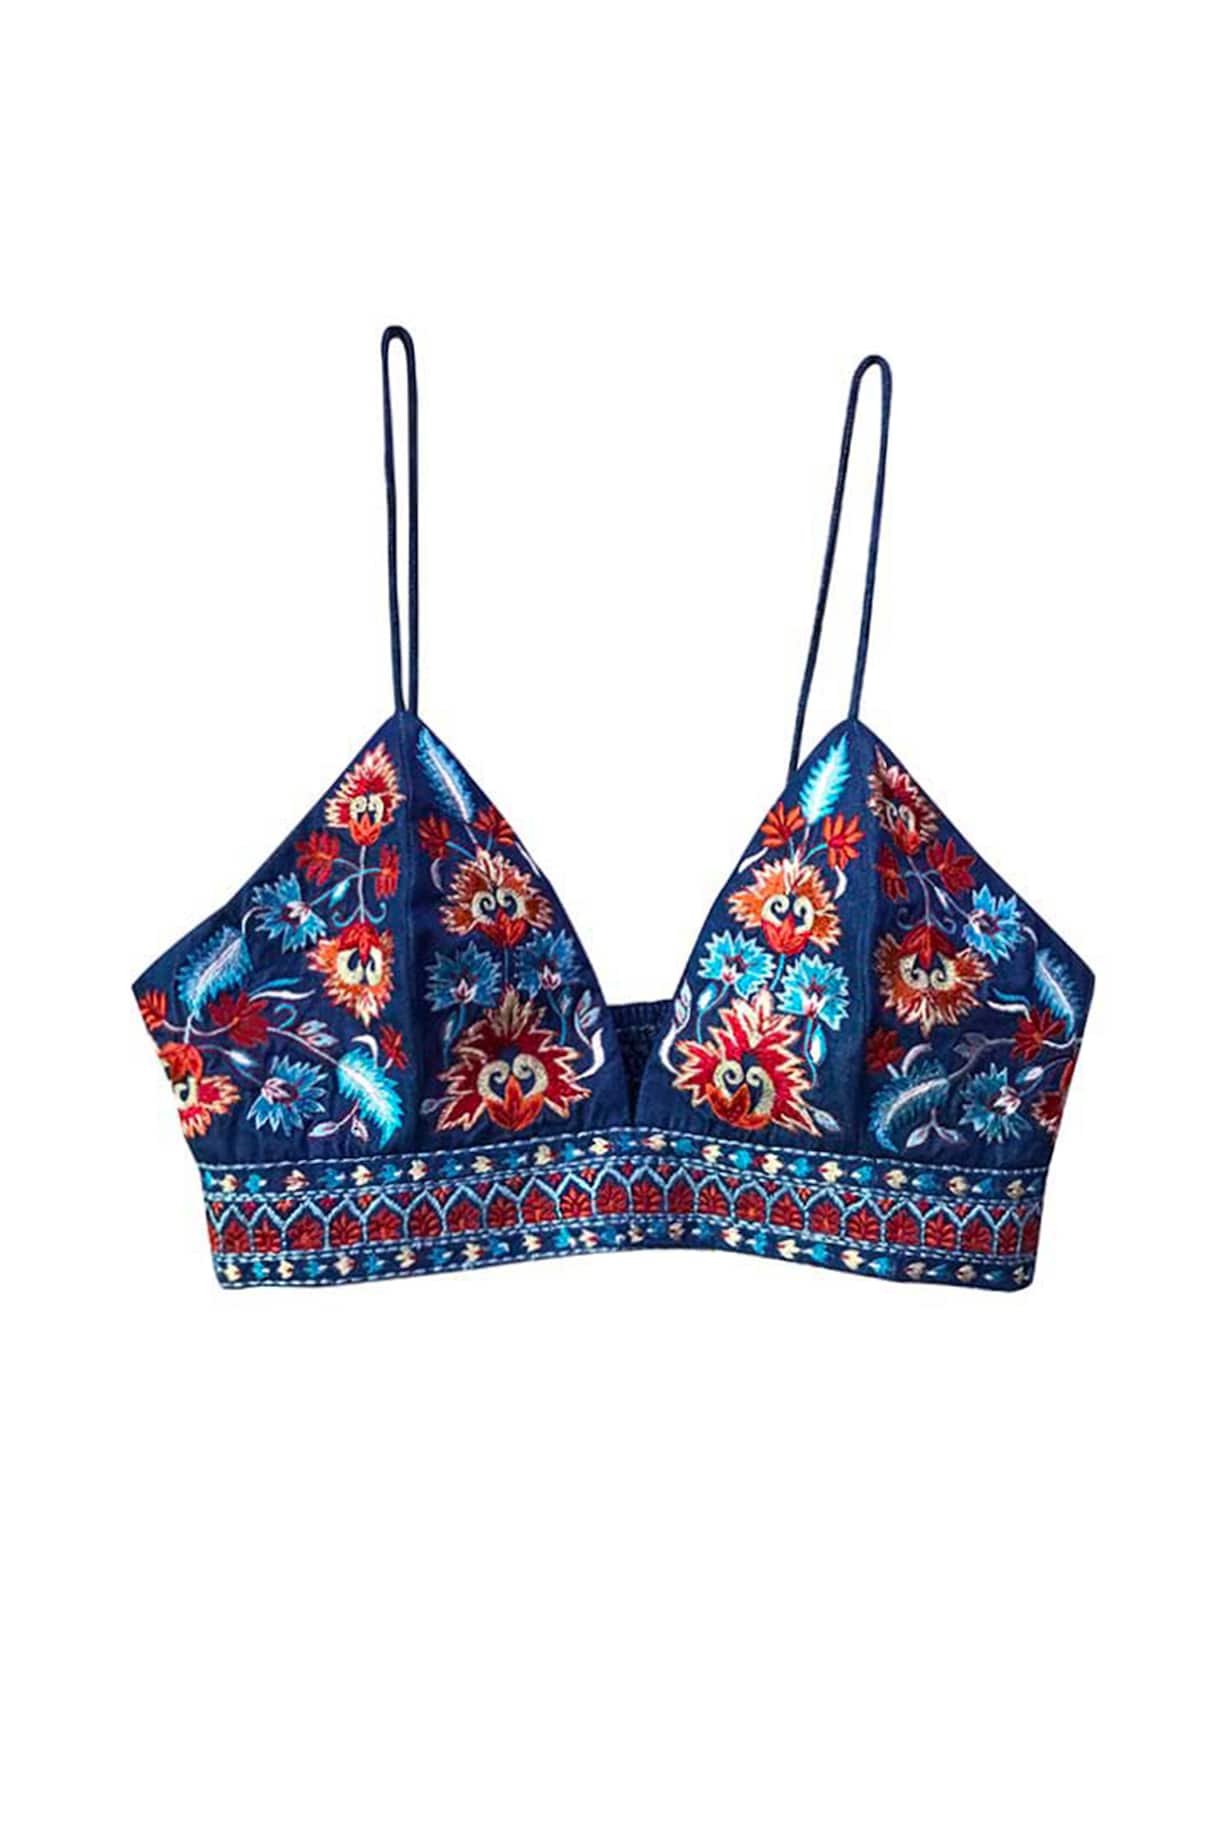 https://img.perniaspopupshop.com/catalog/product/d/a/DASH082202_1.jpg?impolicy=zoomimage